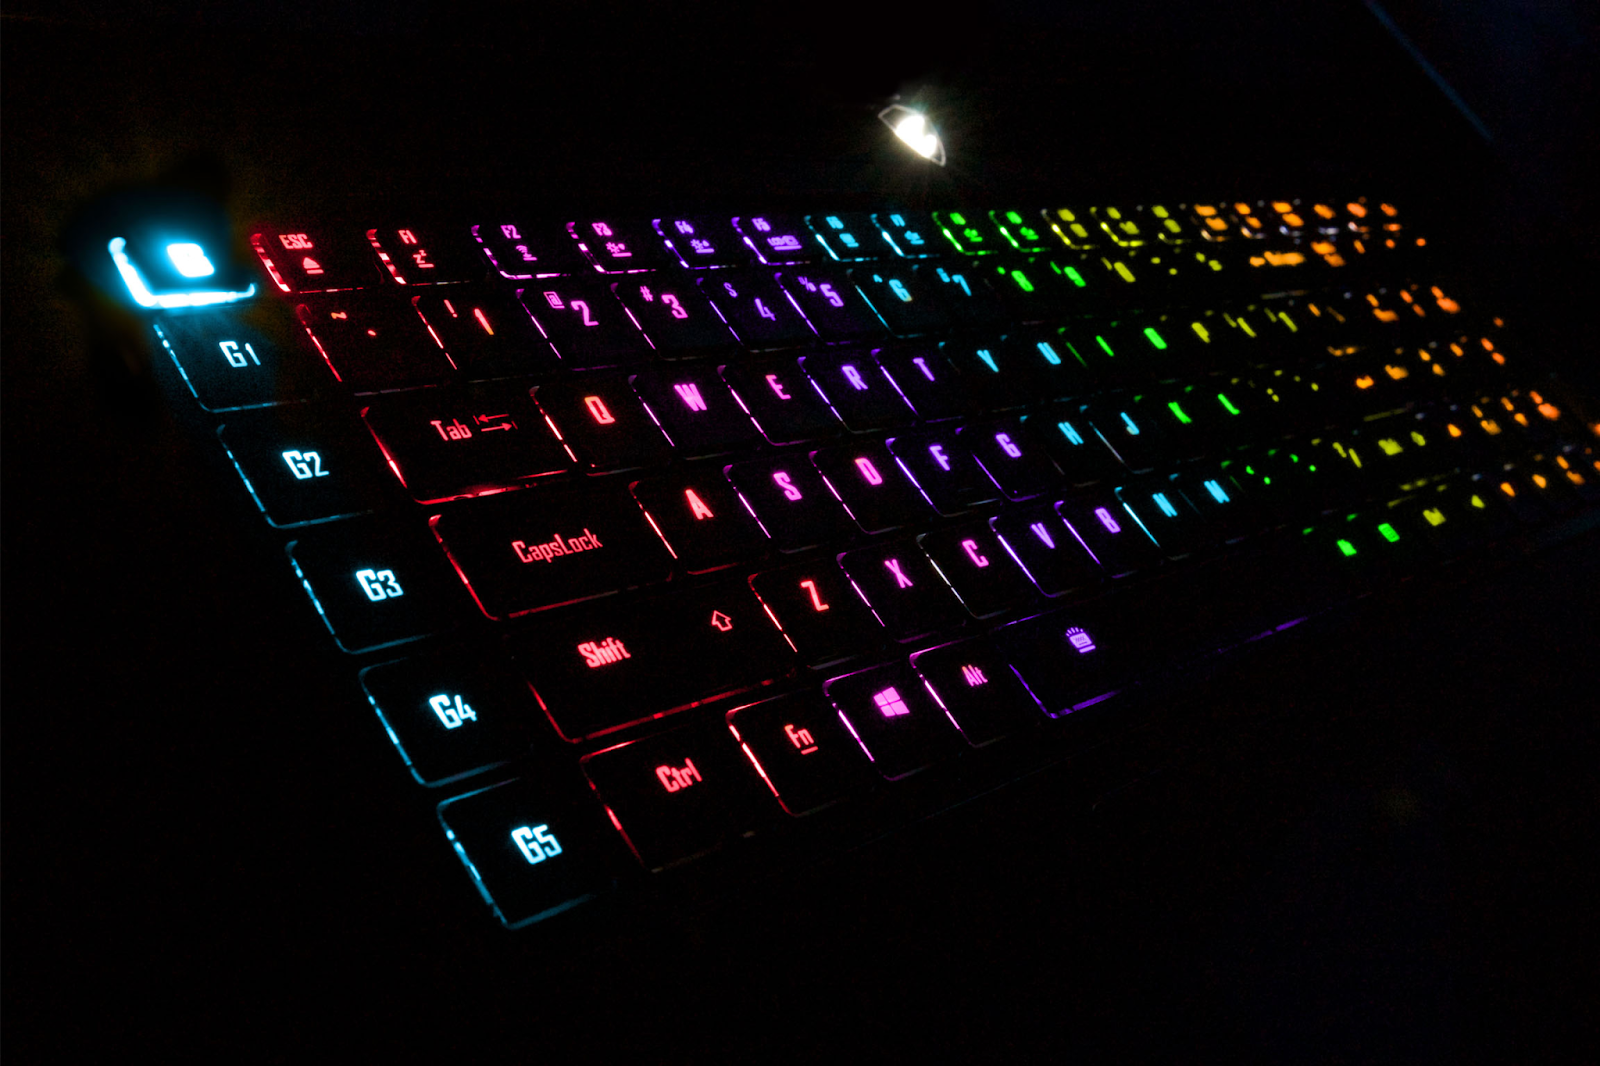 A laptop with a gaming keyboard that has RGB lighting allows for gaming and use in low-light conditions. 